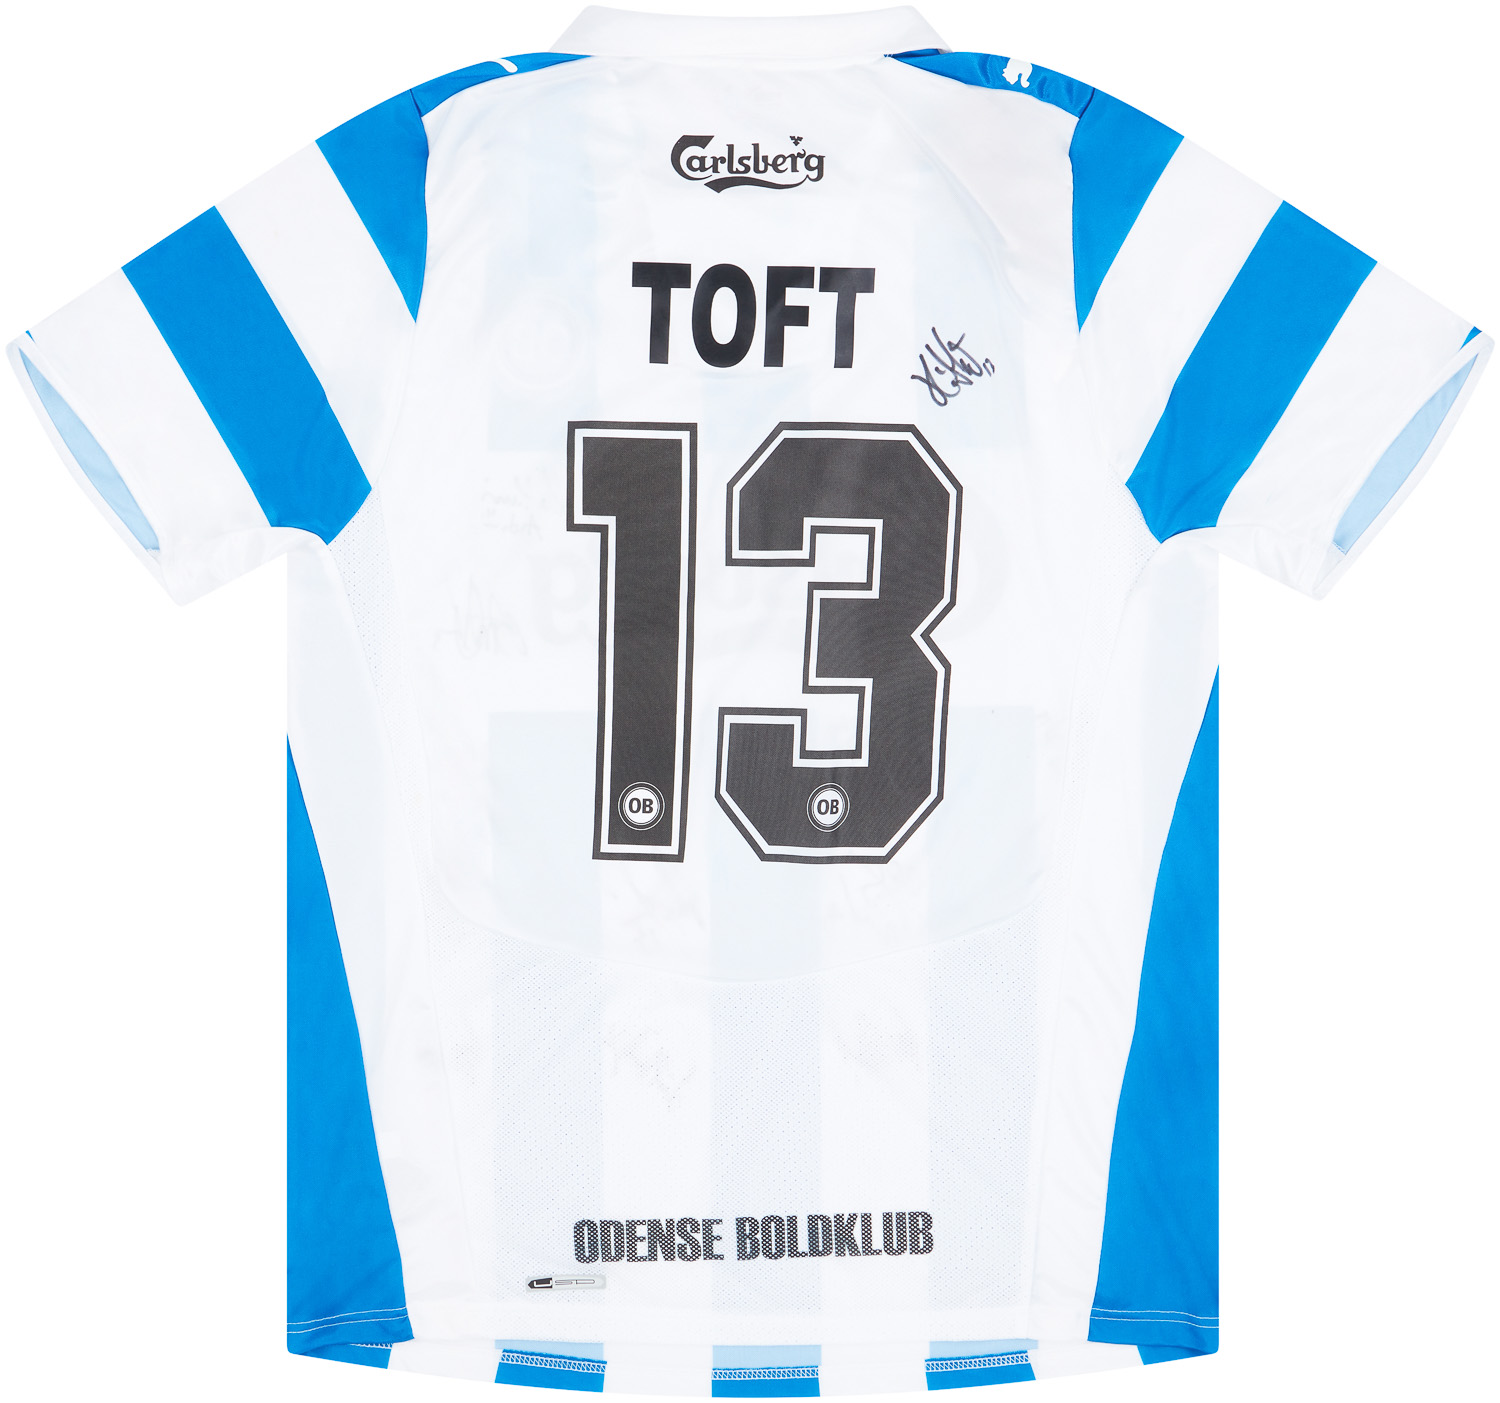 2010-11 OB Odense Match Issue Signed Home Shirt Toft #13